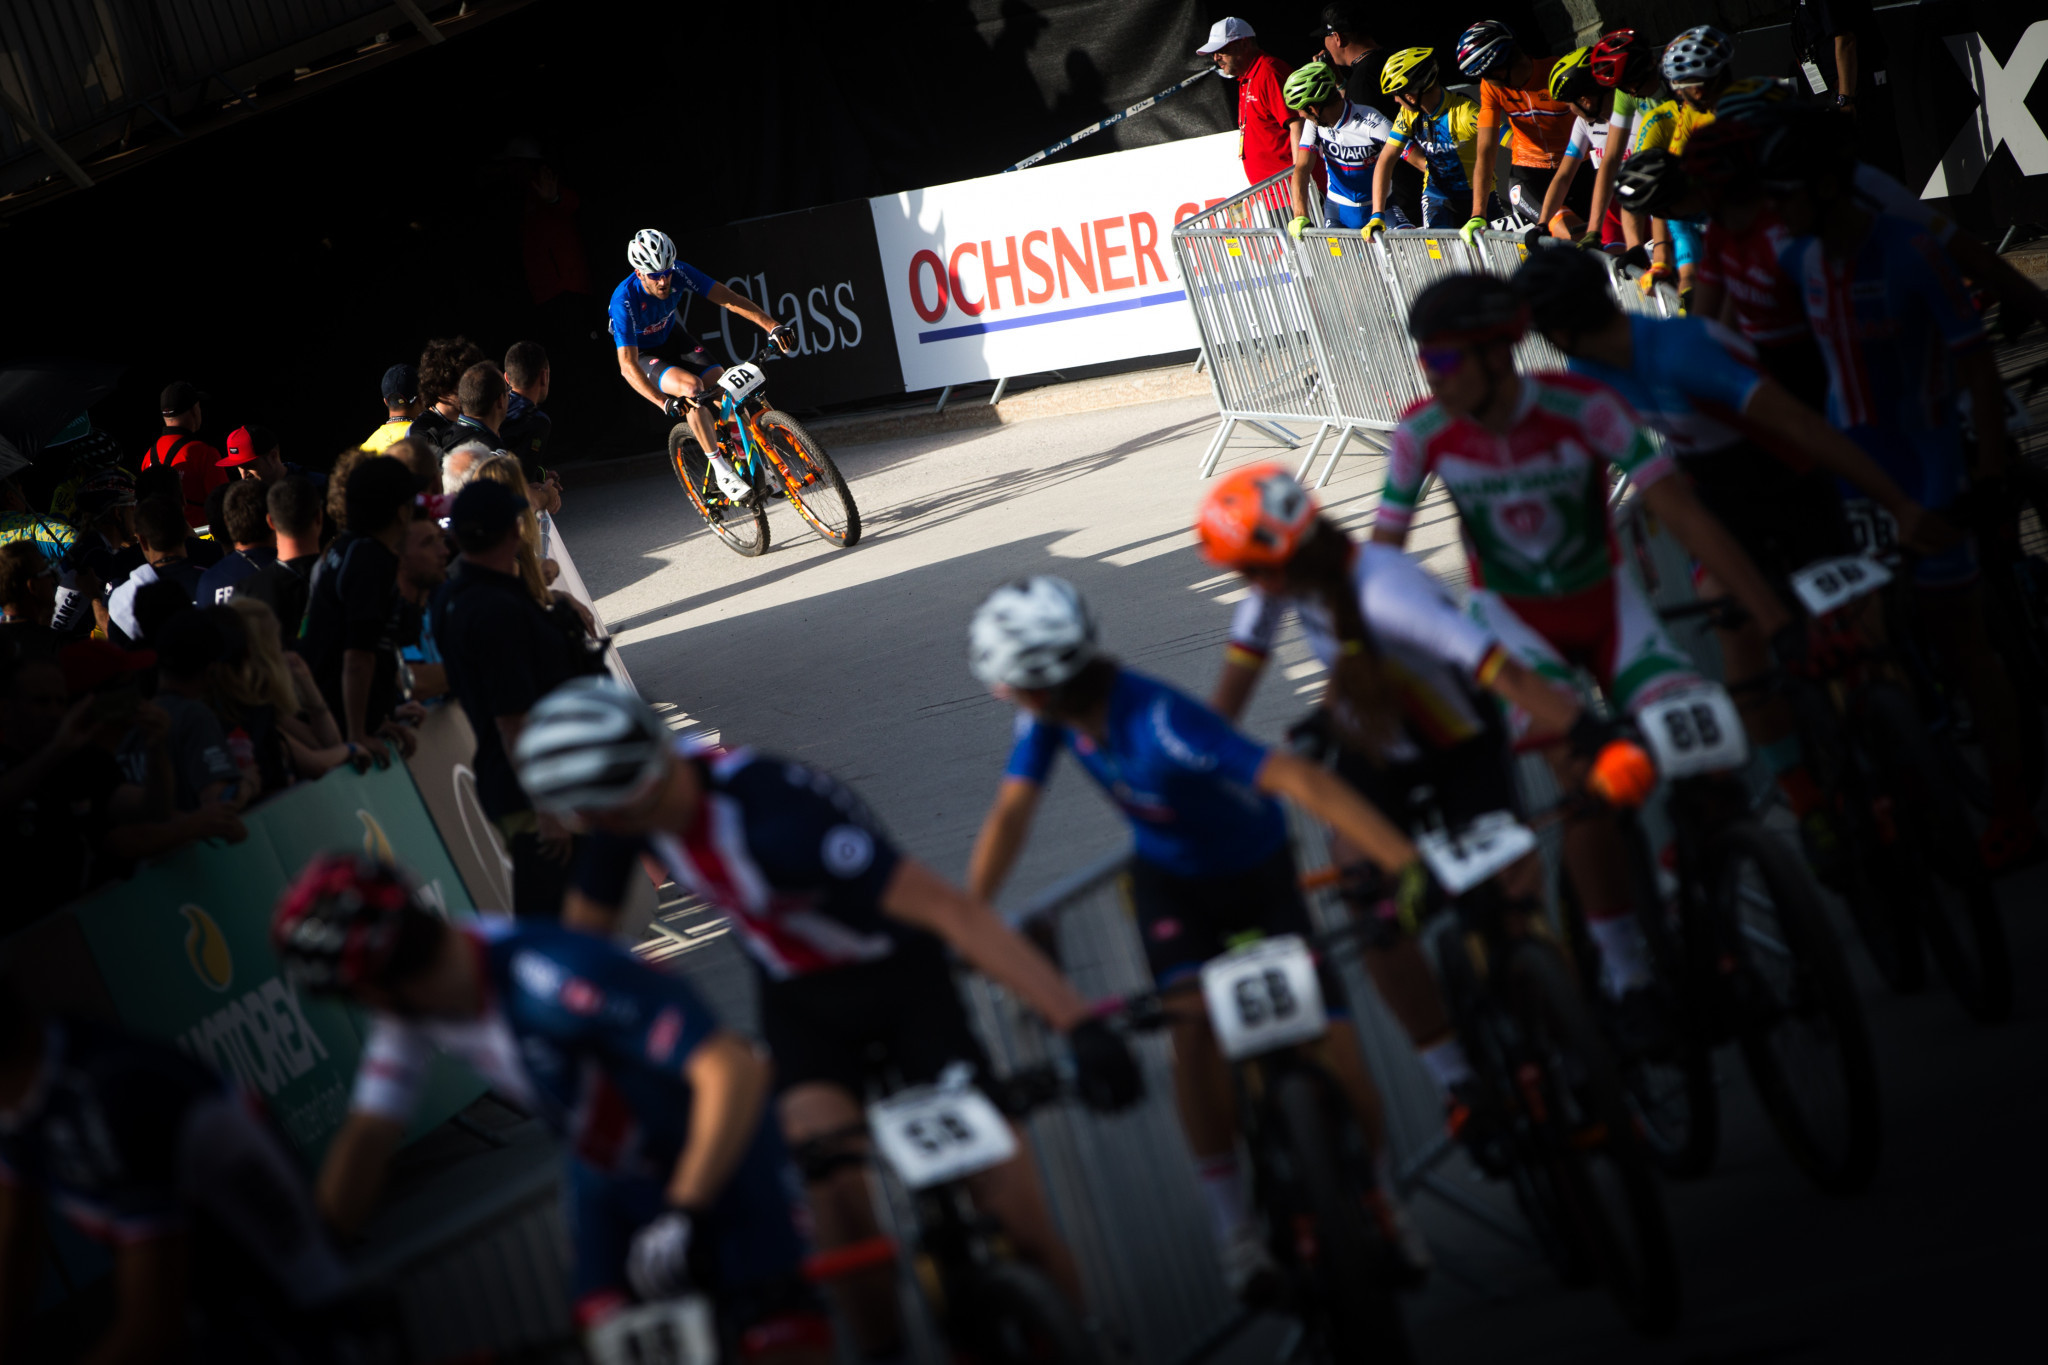 The team relay event opened the Championships in Switzerland ©UCI